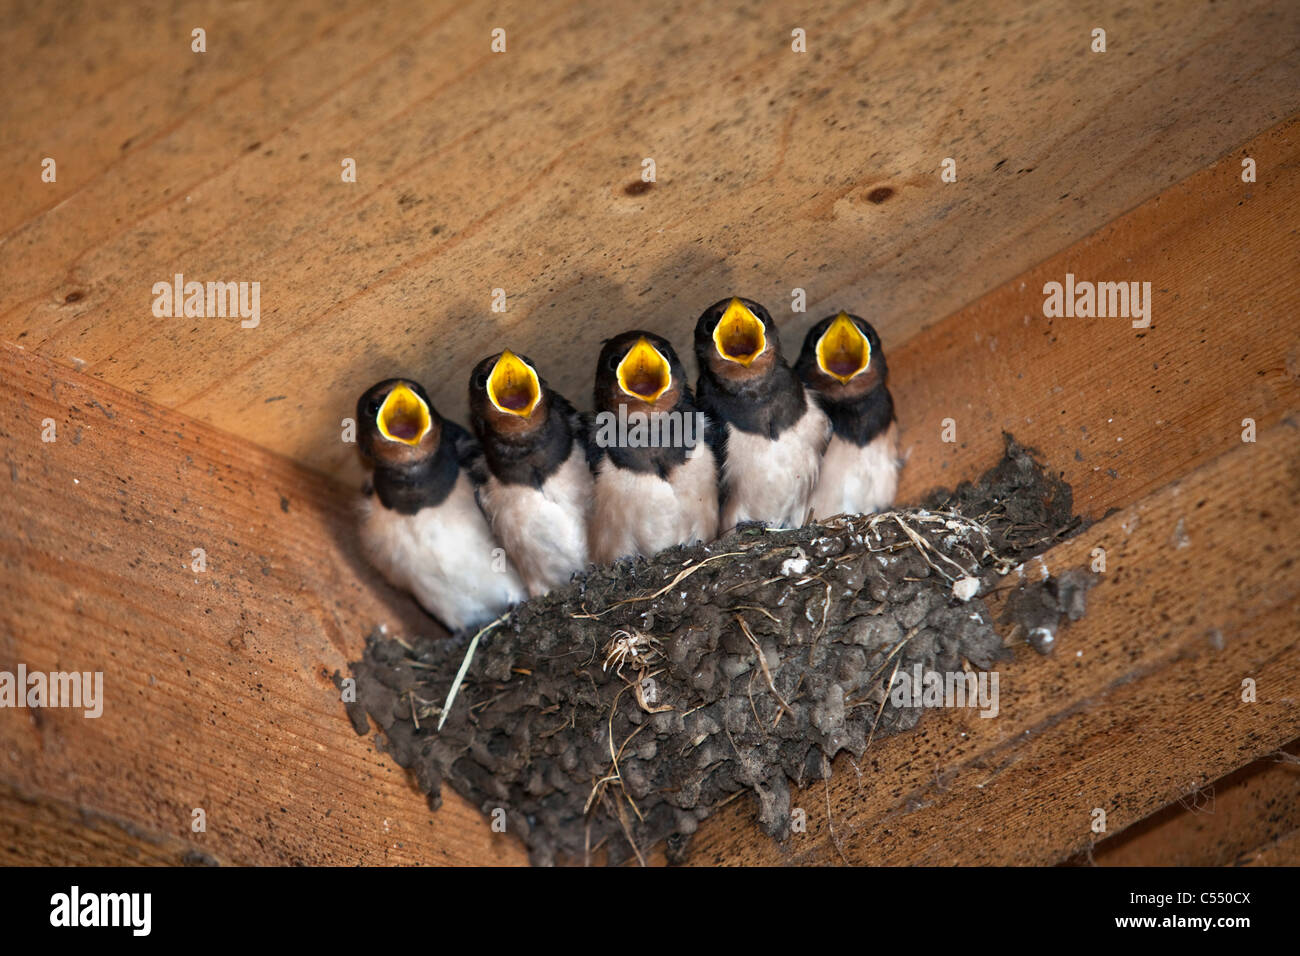 The Netherlands, Lemmer, Young Barn Swallows on nest. Hirundo Rustica. Stock Photo